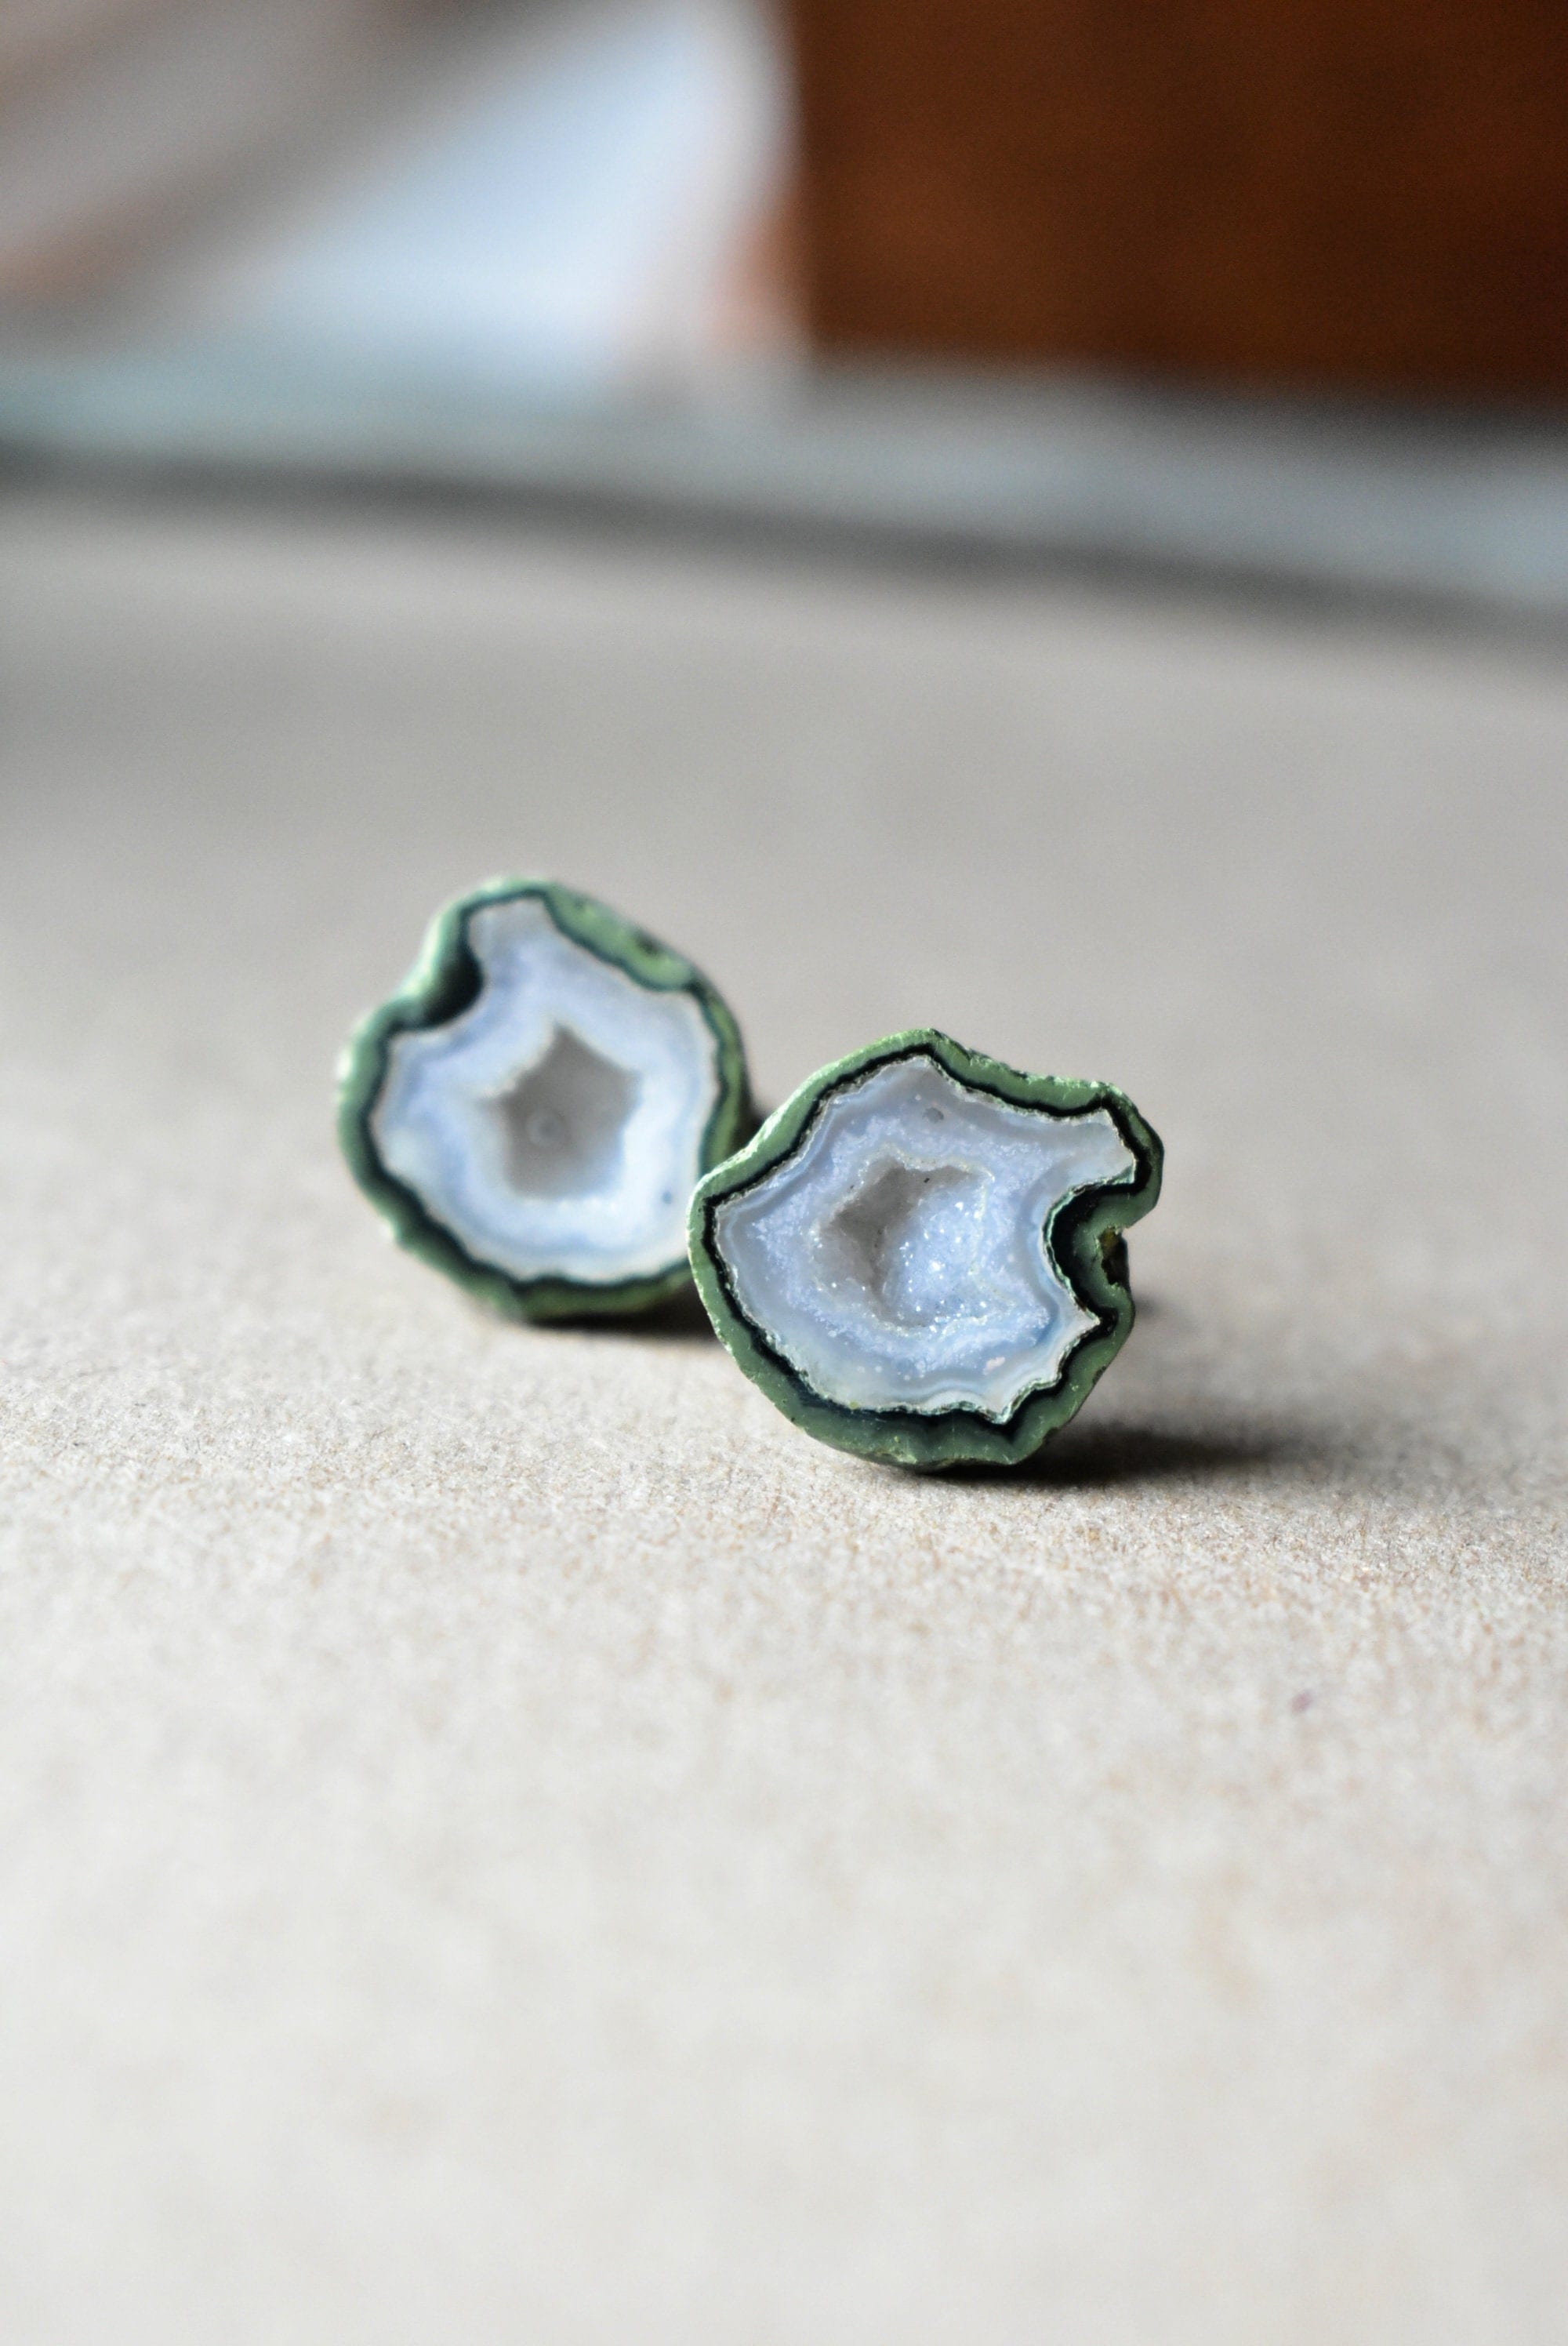 Unique Fathers Day Gift for Dad, Raw Geode Cufflinks, White & Green Suit Cuff Links, French Cuff Shirt Jewelry, Husband Stone Valentines